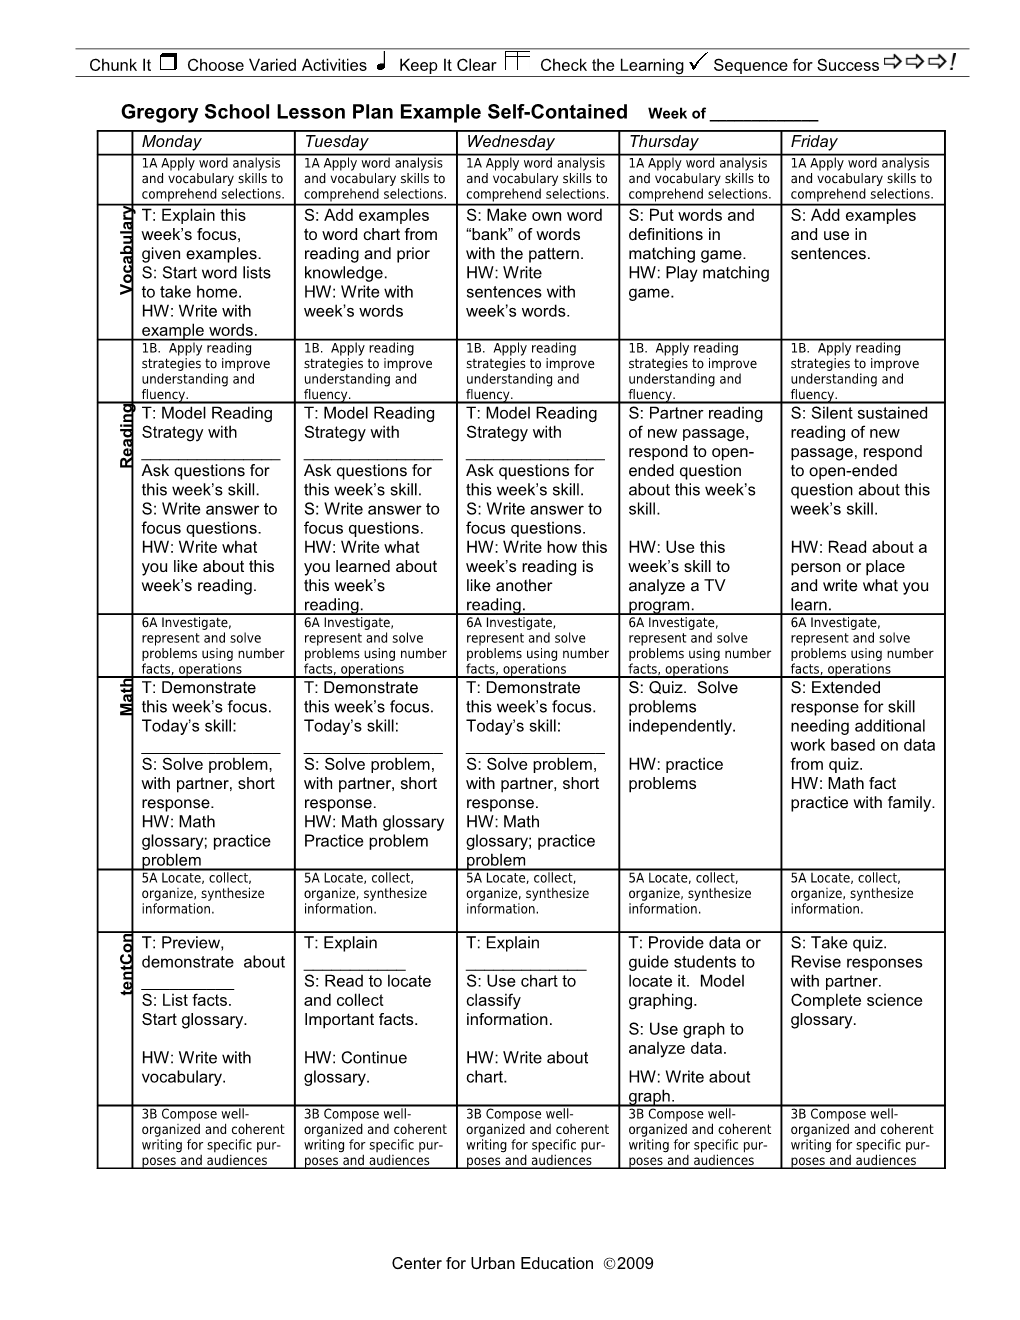 Lesson Plan Template Grades 3, 5, 6, 8 Self-Contained Week of ______